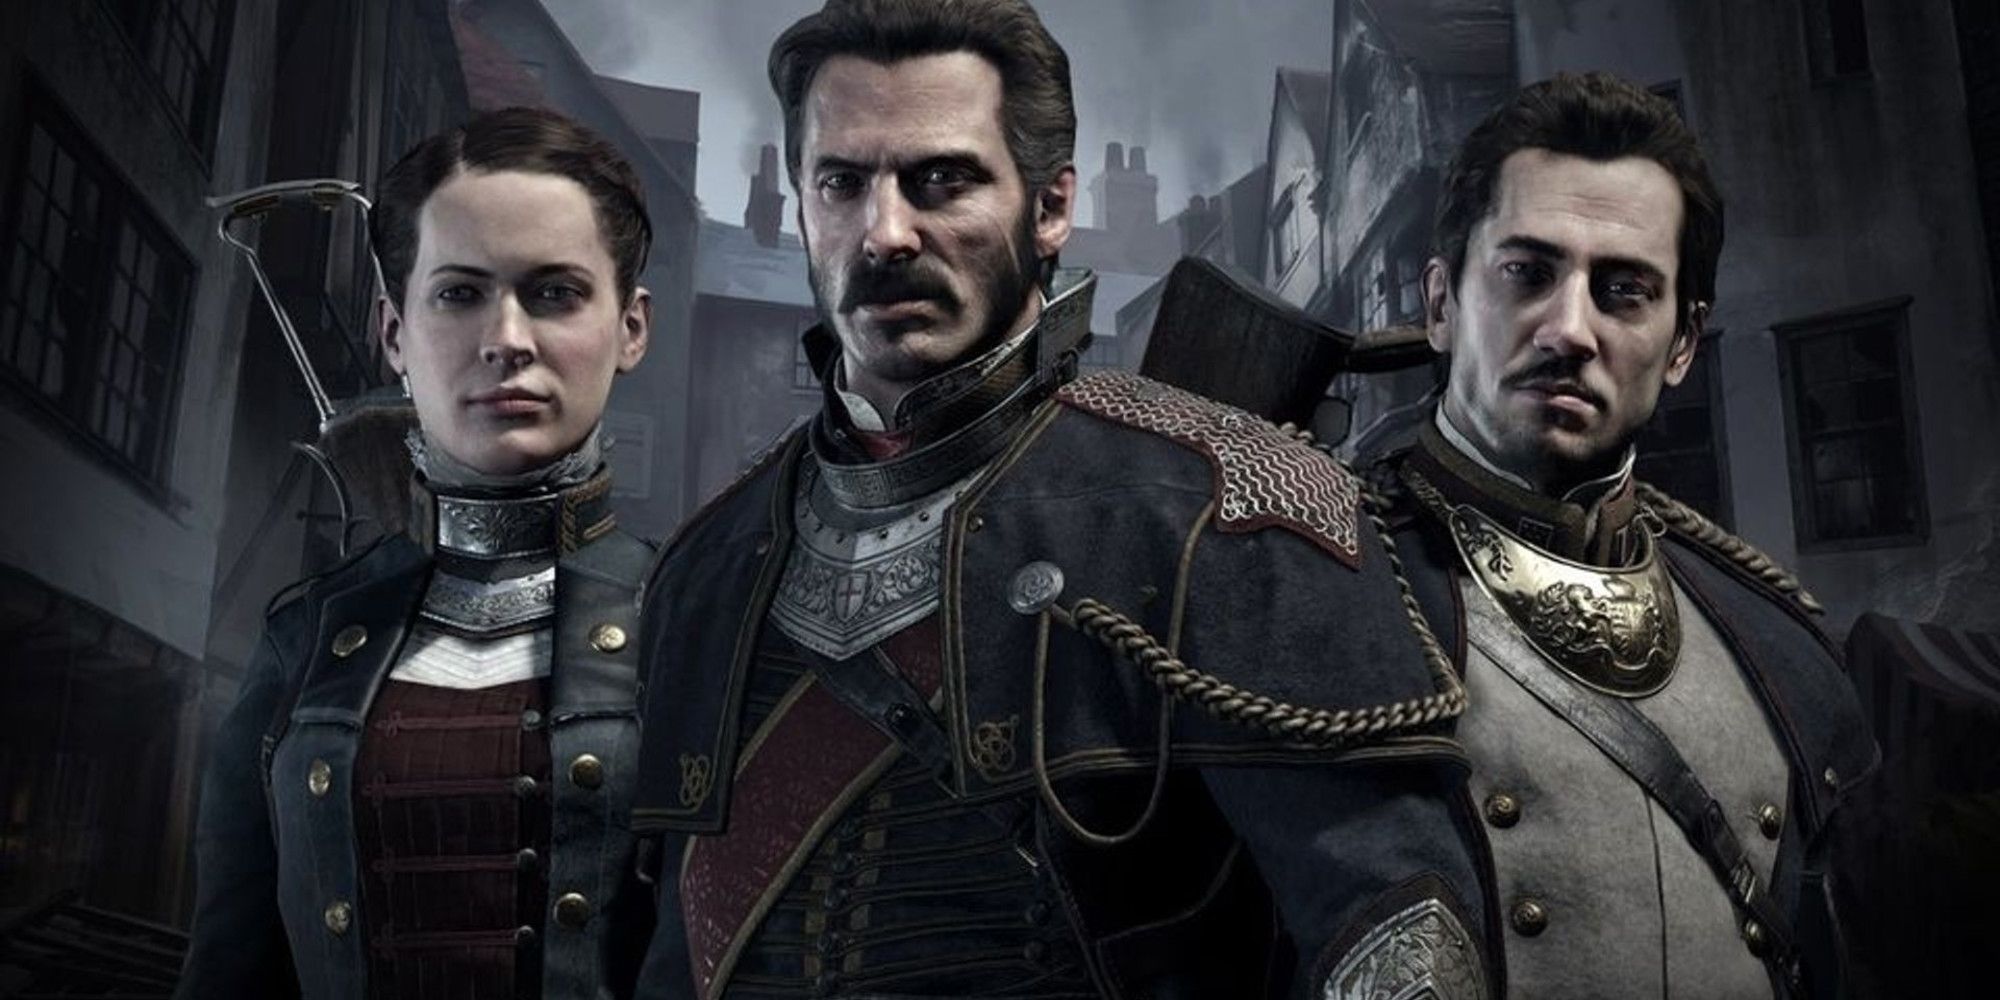 Lady Igraine, Sir Galahad, and Marquis de Lafayette as seen on the cover art for TheOrder: 1886.